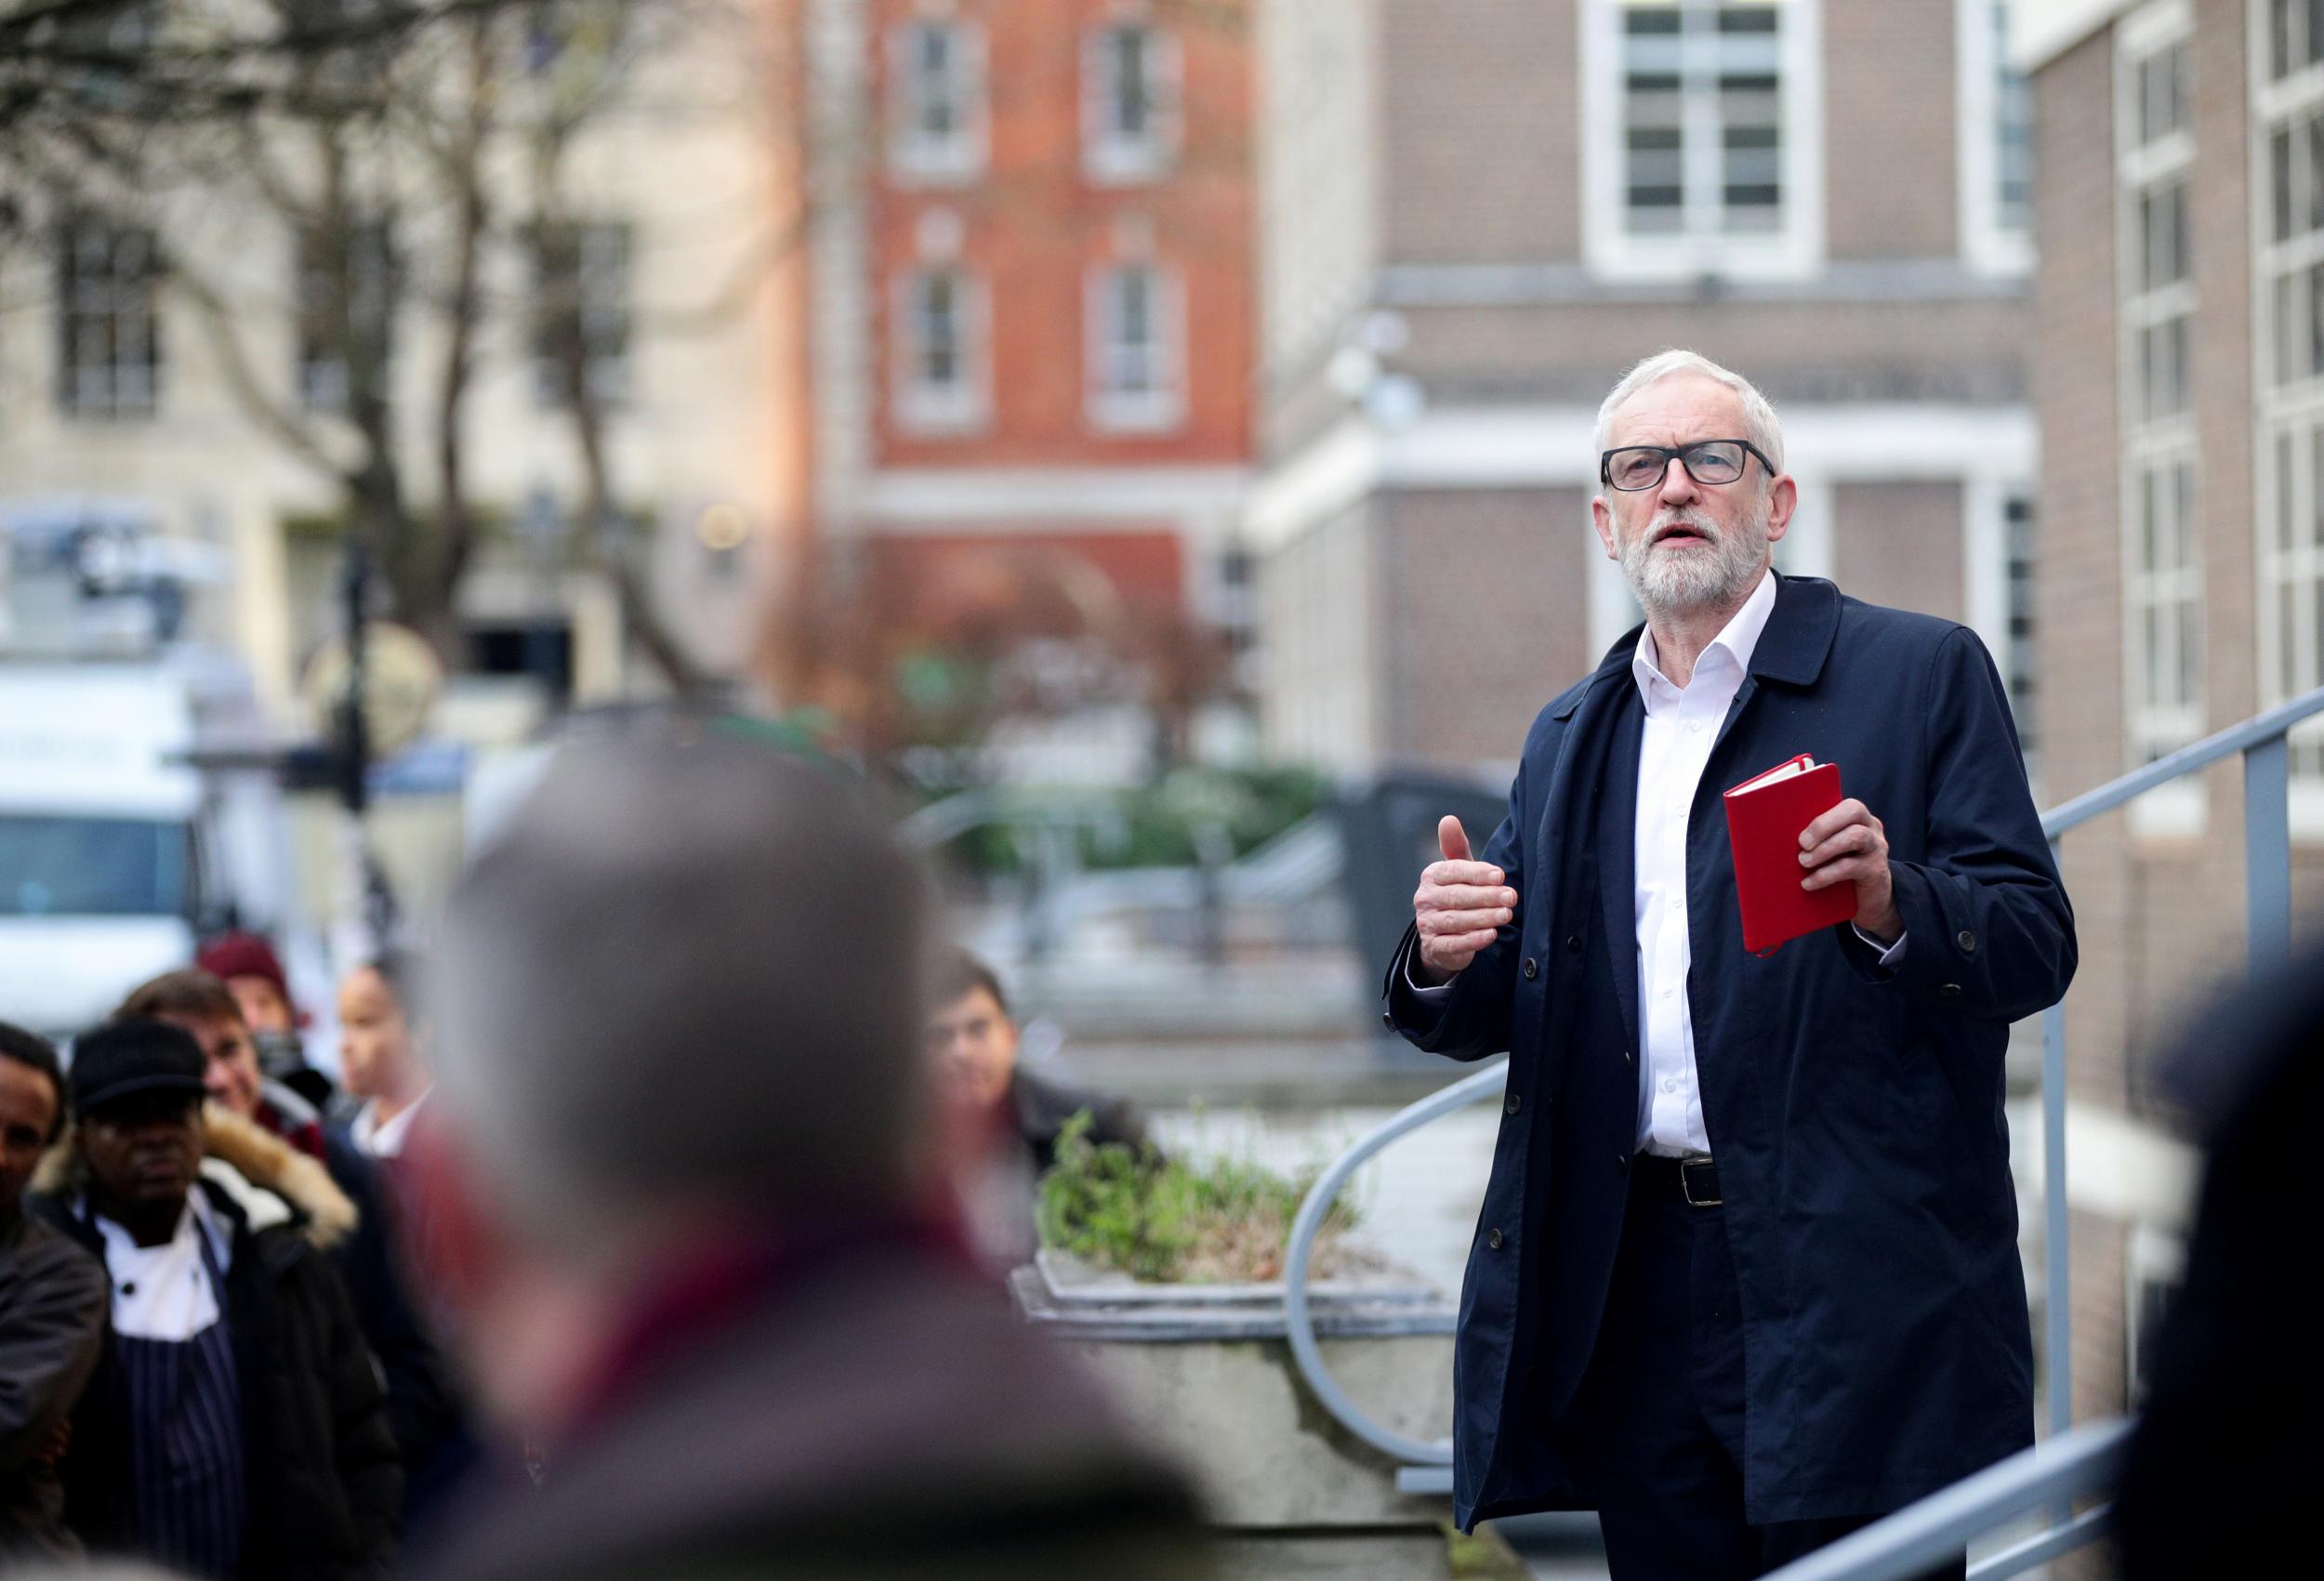 Jeremy Corbyn during a rally speech in the 2019 election campaign